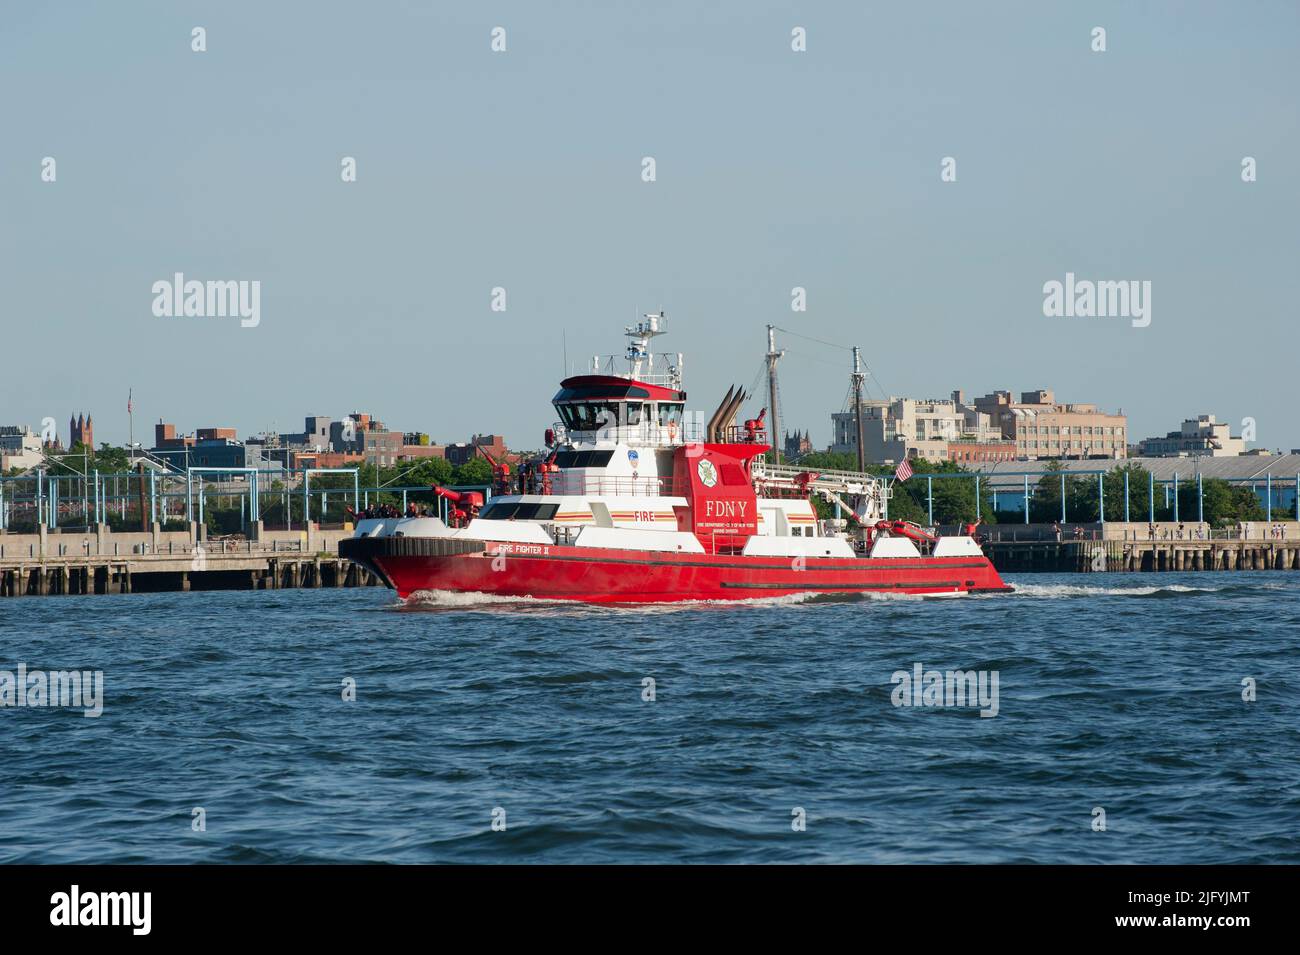 In the runup to the July 4, 2022 fireworks, the FDNY's fireboat, Firefighter II traveled up the East River. Stock Photo